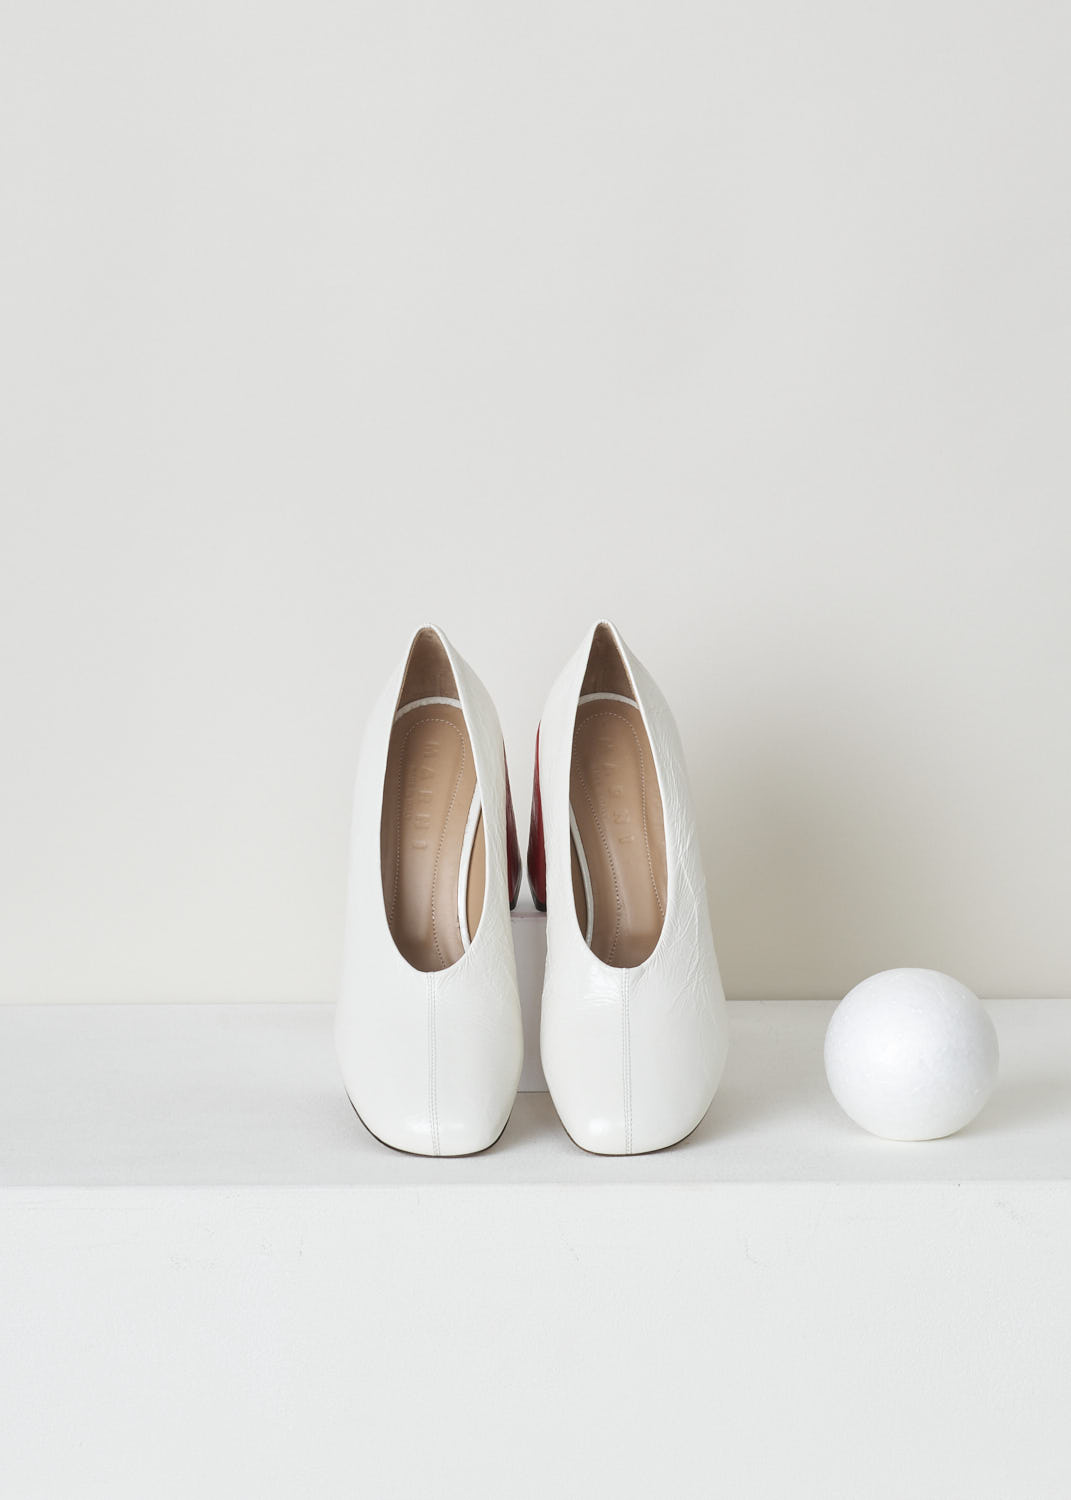 MARNI, WHITE PUMP WITH CONTRASTING RED HEEL, PUMS001609_LV801_00W01, White, Red, Top, These white pumps have a round nose with a decorative seam and a contrasting red block heel. What sets these pumps apart is the crinkled finish throughout the shoe.

Heel height: 9.5 cm / 3.7 inch
